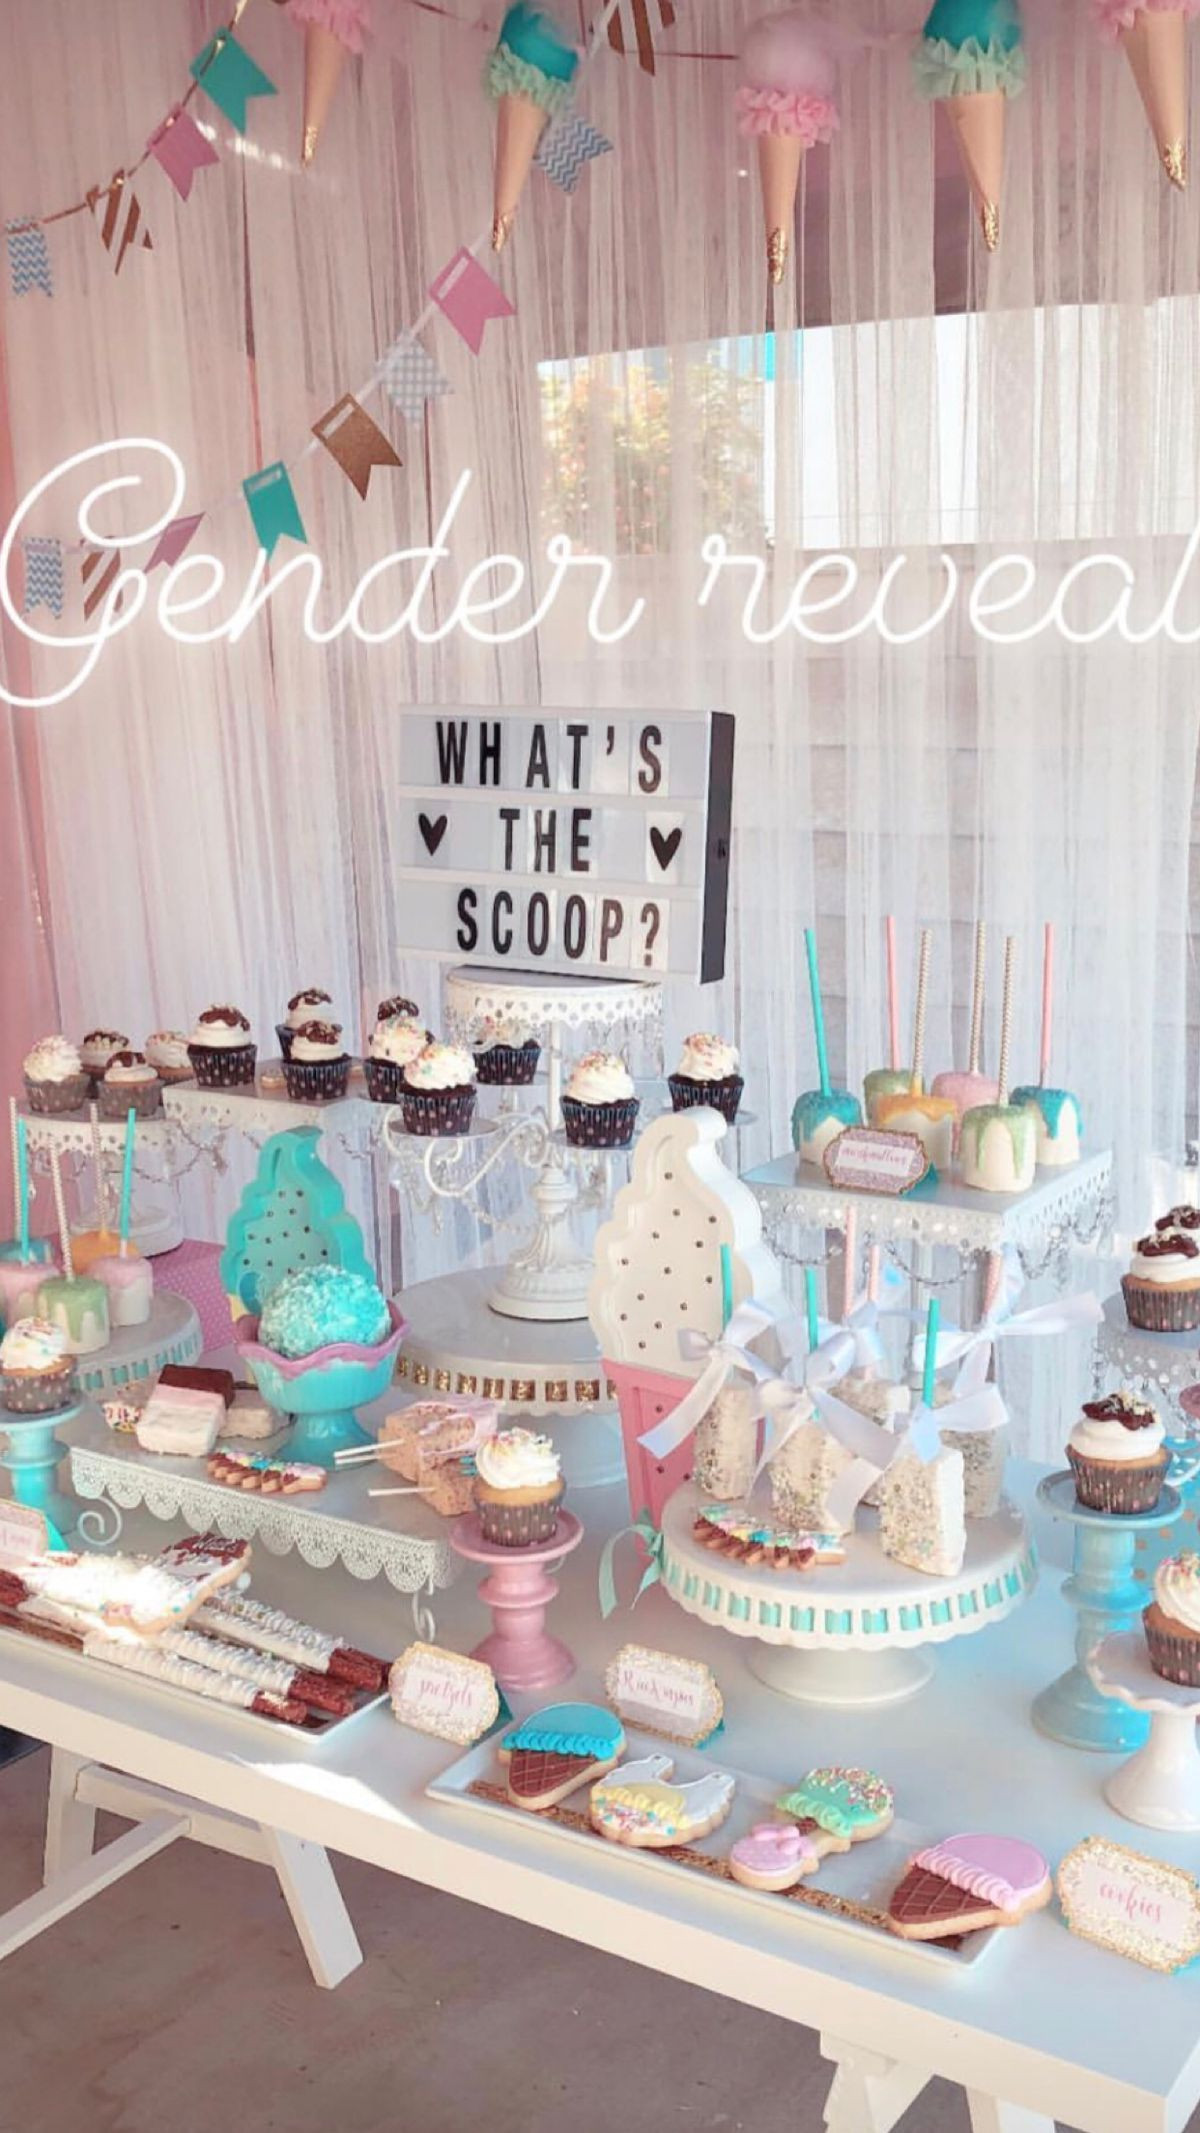 Decoration Ideas For Gender Reveal Party
 Pin by Alexis Johnson on Reveal gender party